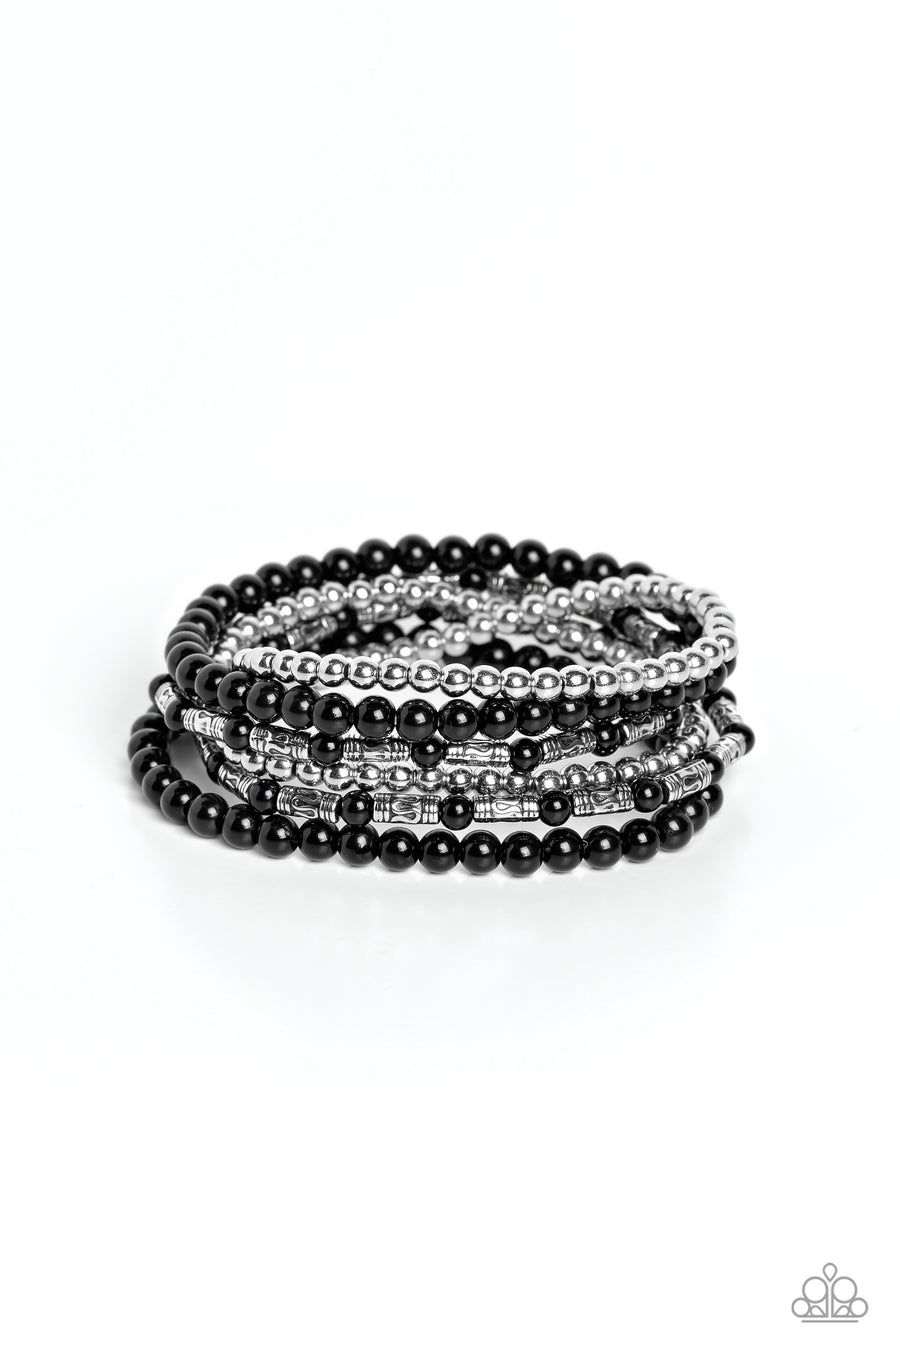 Mythical Magic - Black and Silver Bracelet - Paparazzi Accessories - A trendy collection of black, silver and silver cylindrical textured beads wrap around the wrist on elastic stretchy bands for a colorful, seasonal stack. Sold as one set of six bracelets.